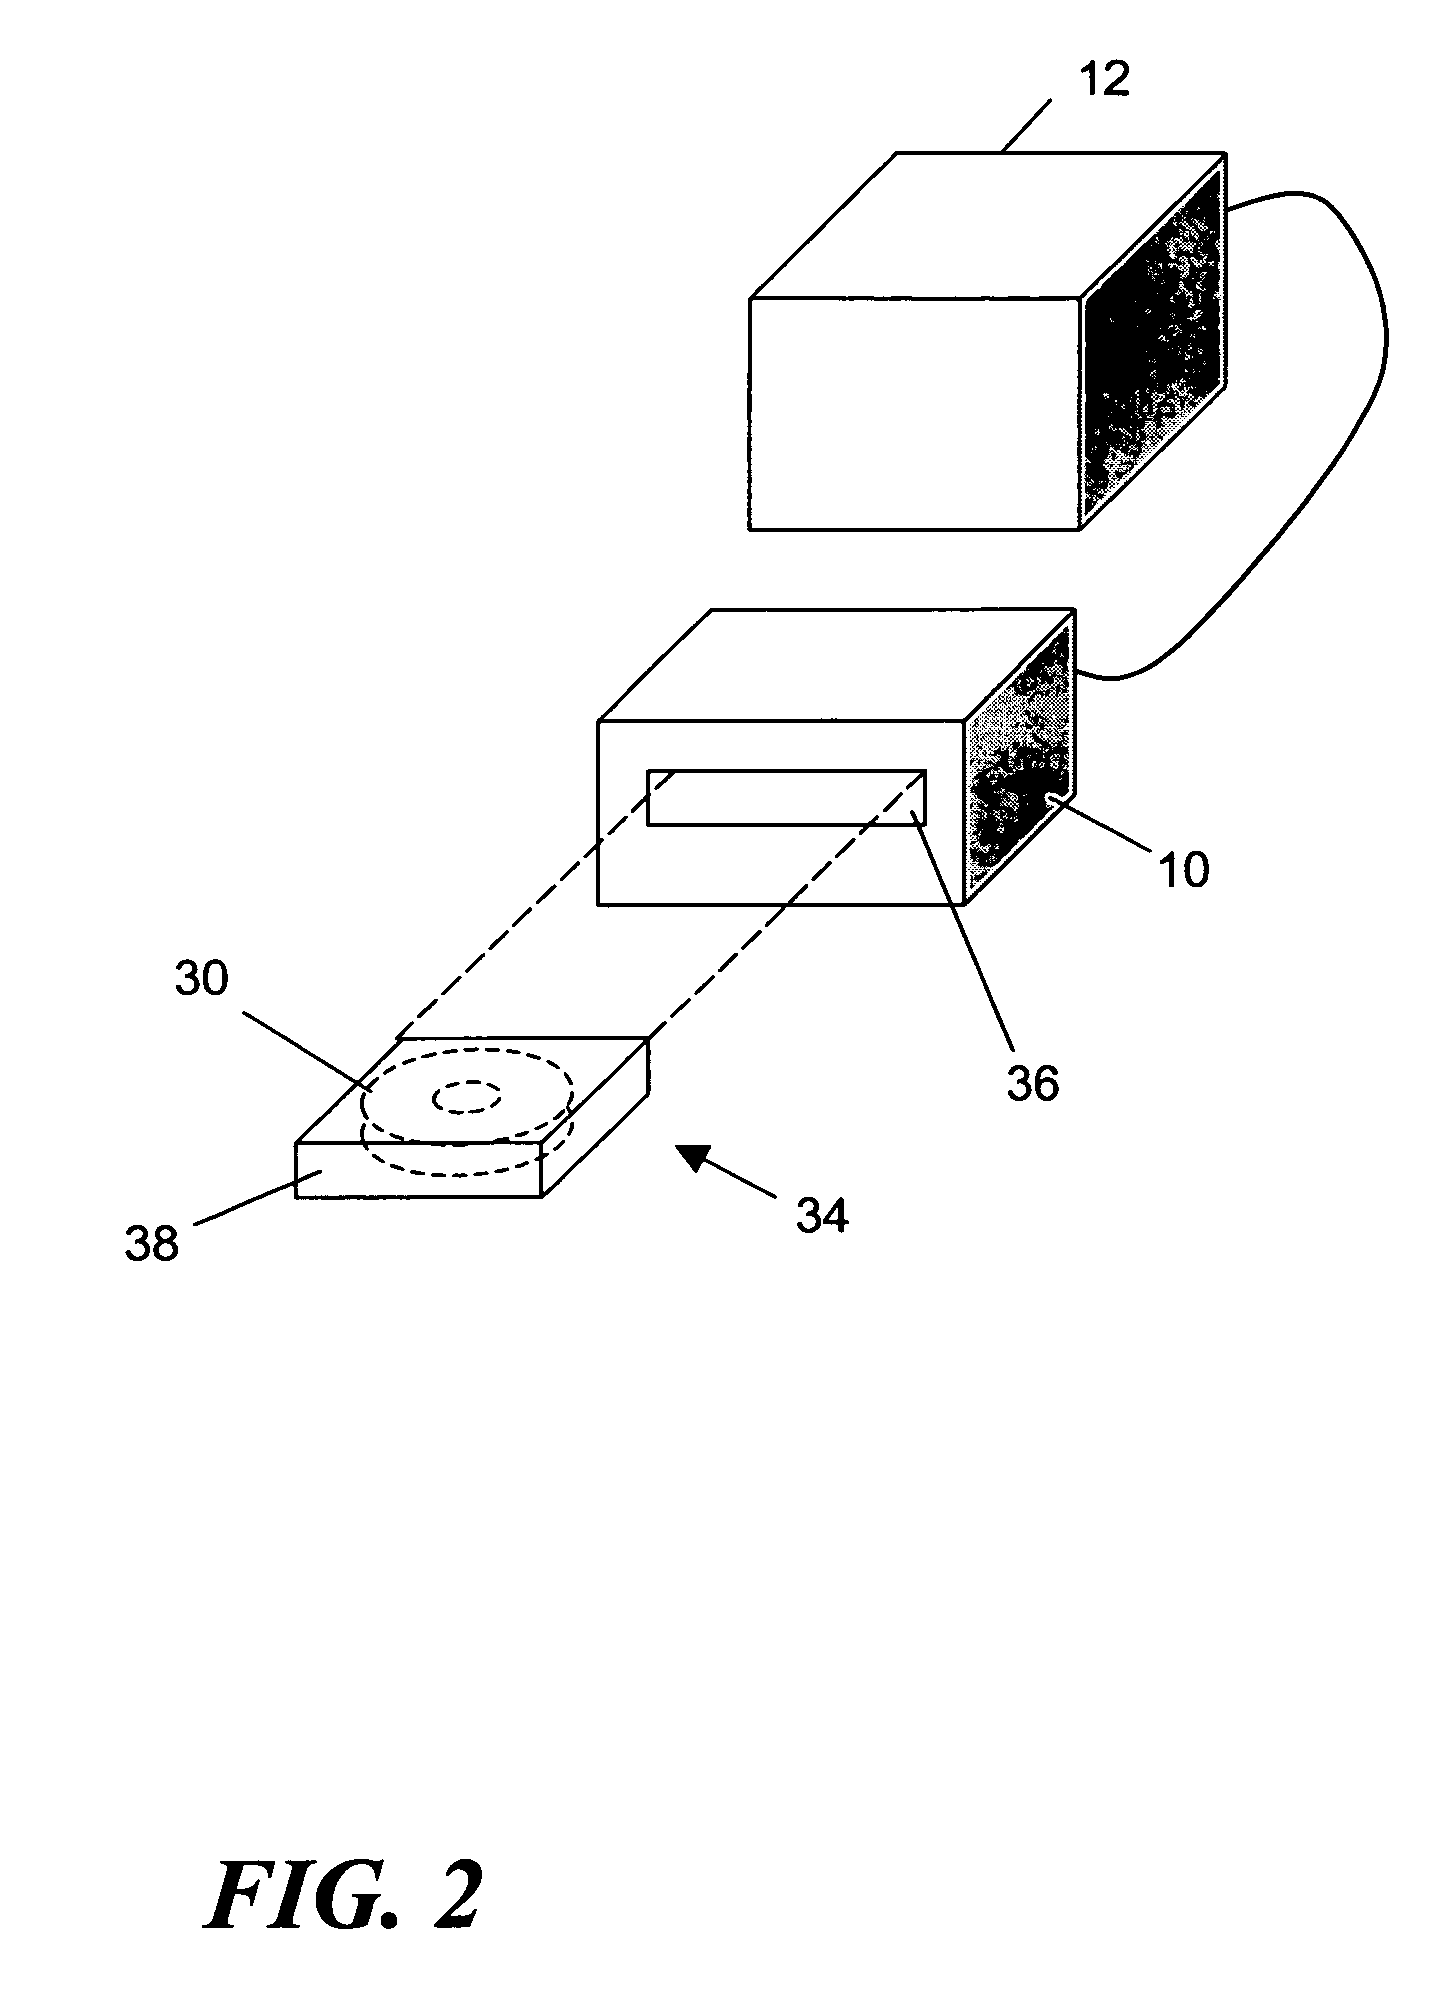 Tape tension modulation system and method